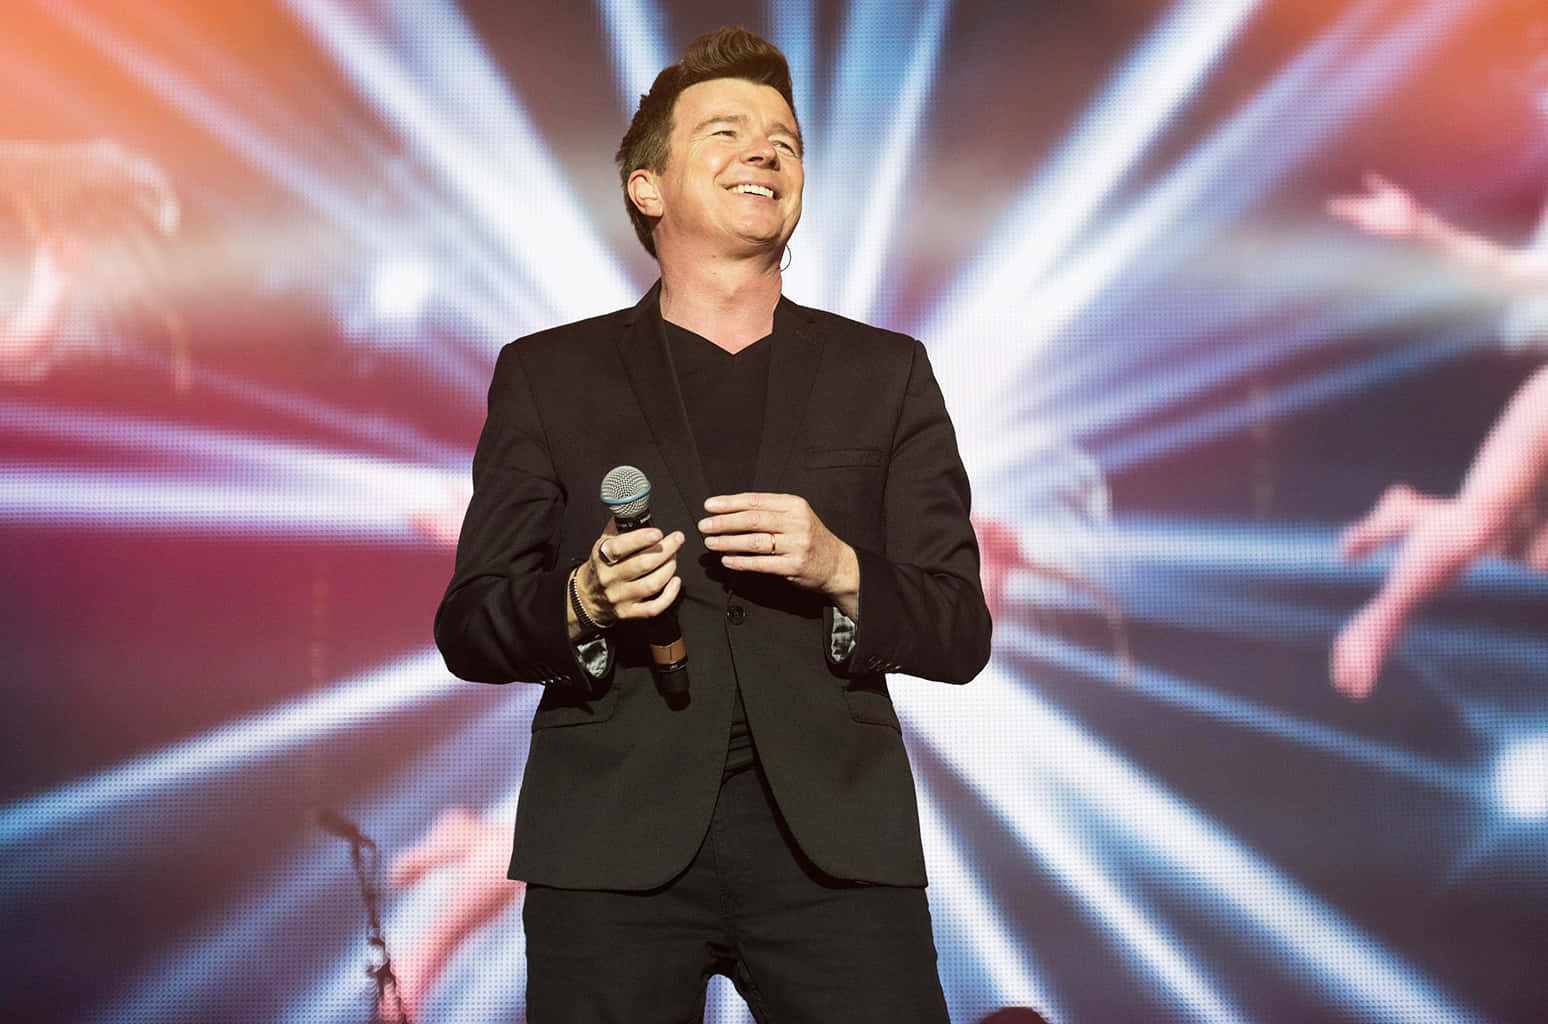 Rick Astley Gets Ready To Perform Background